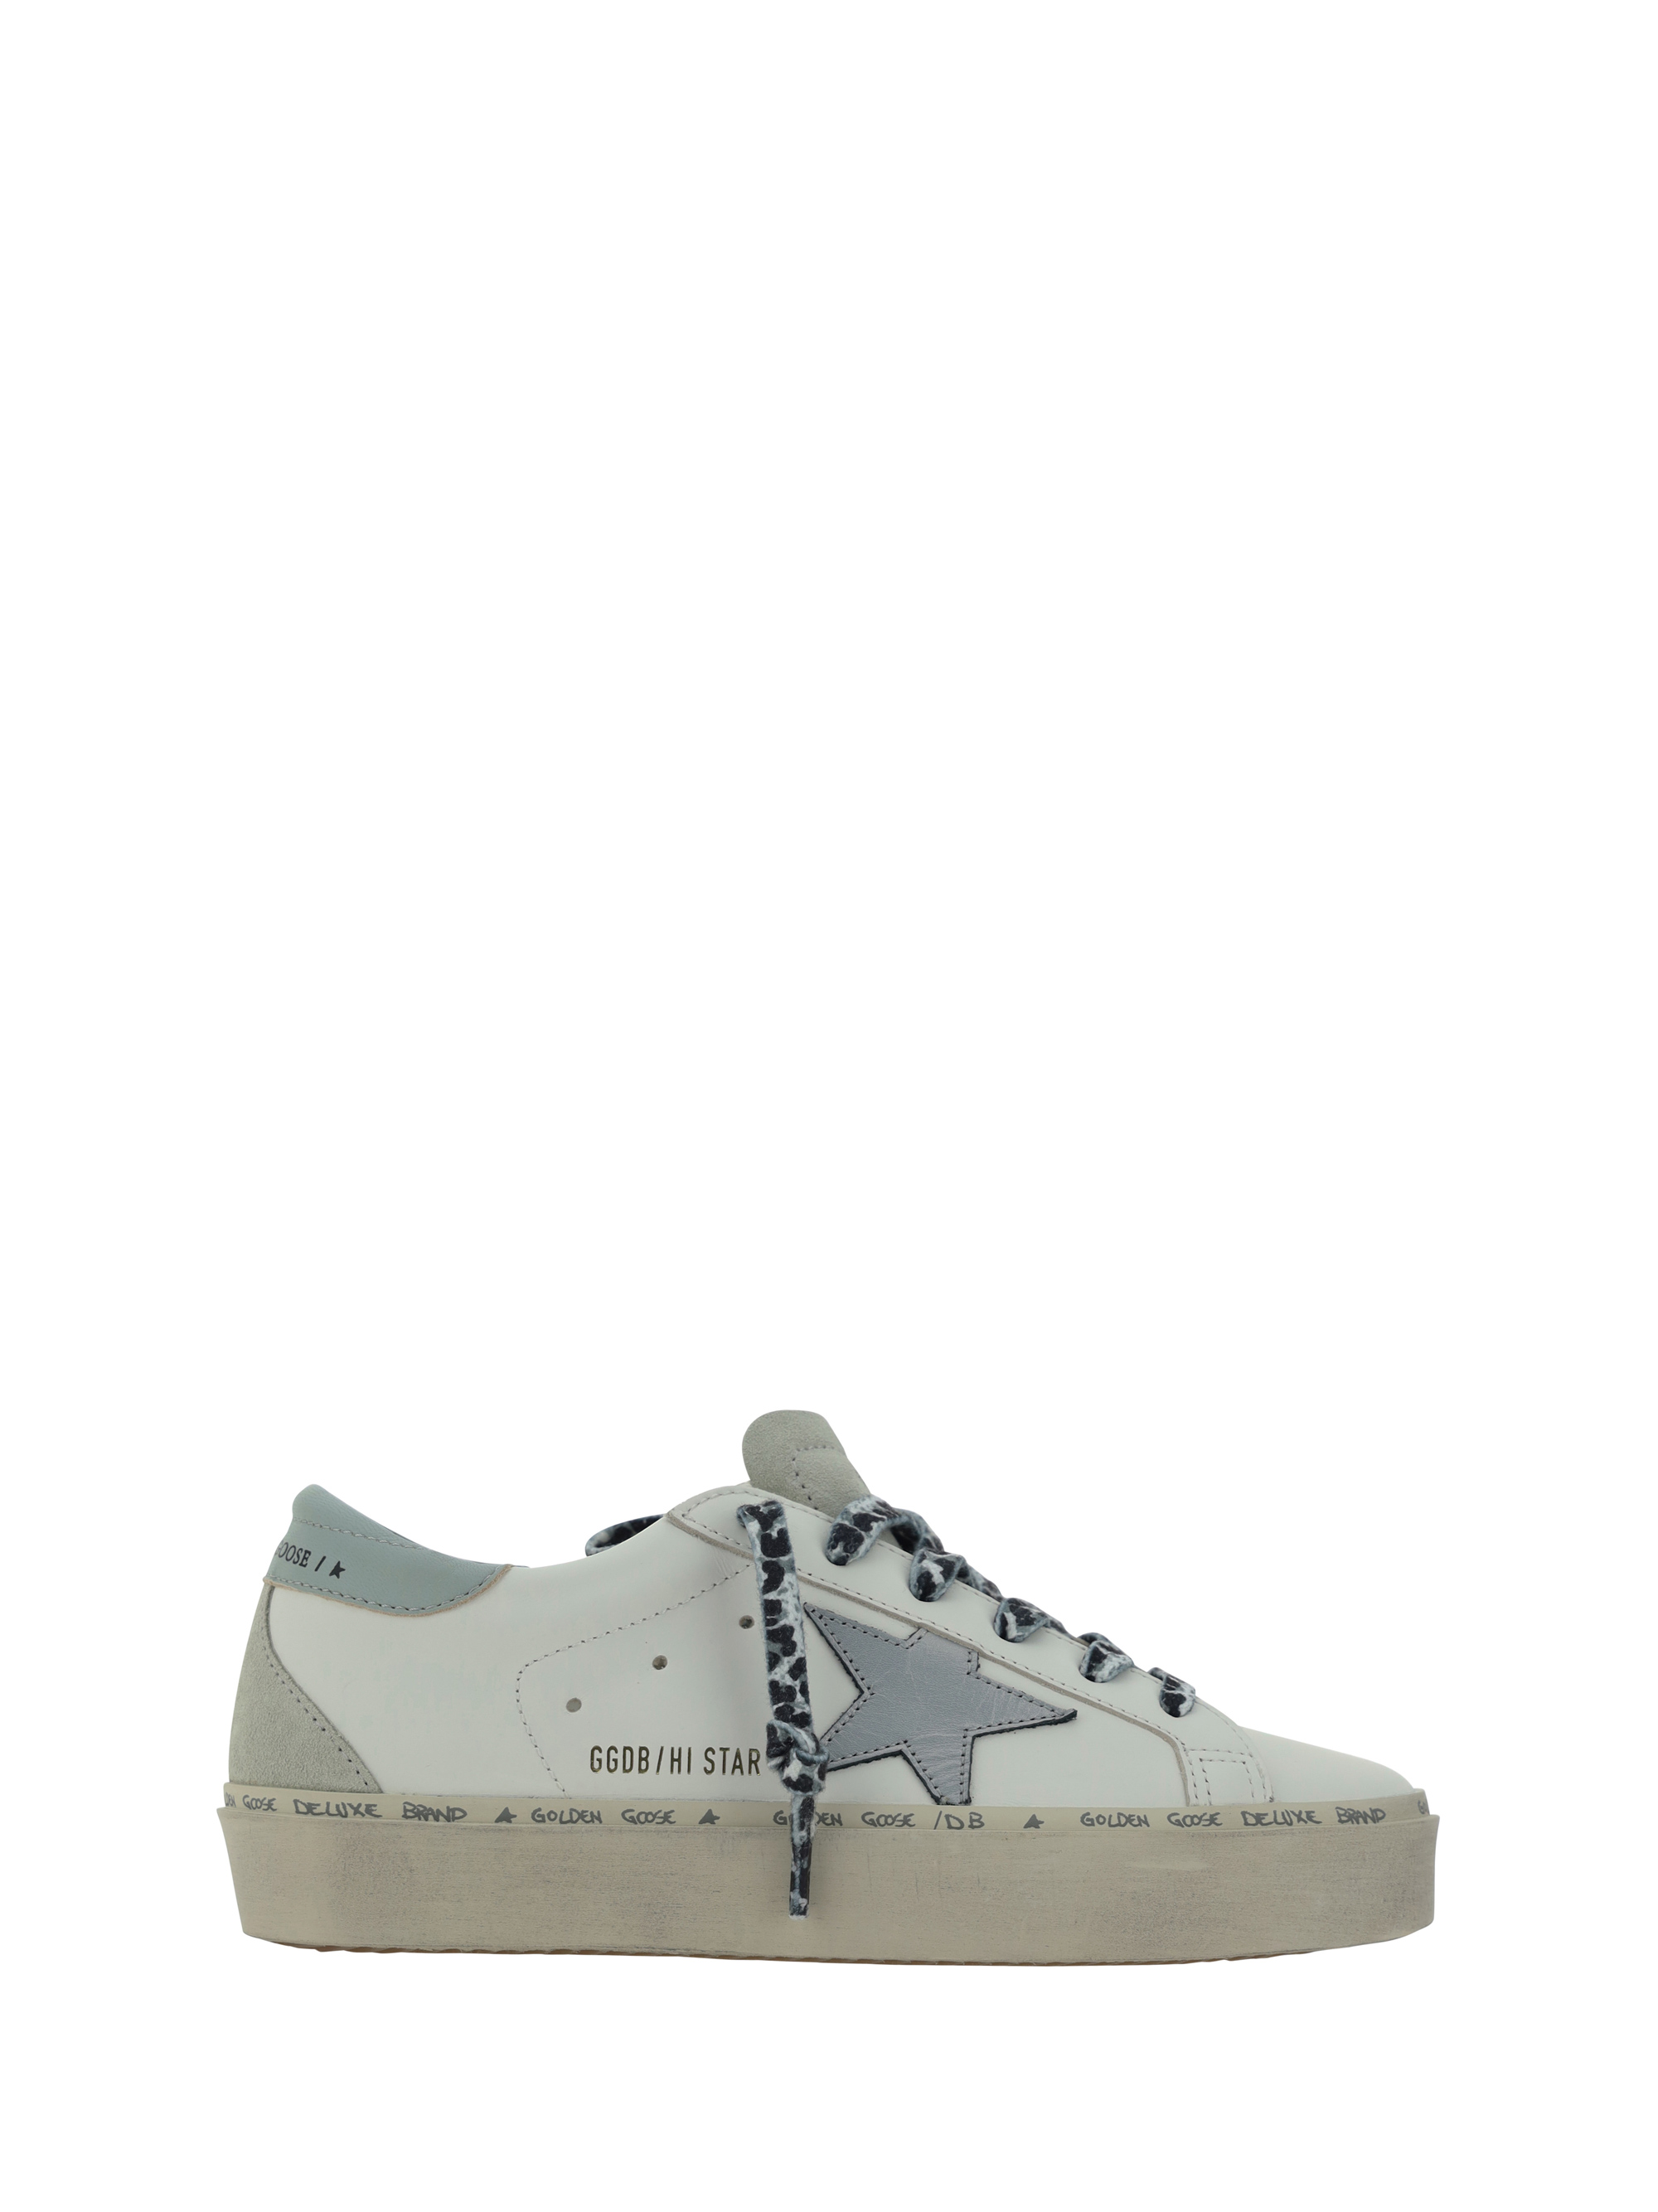 Golden Goose Hi Star Leather Sneakers In Optic White/gray Dawn/orchid Hush/a